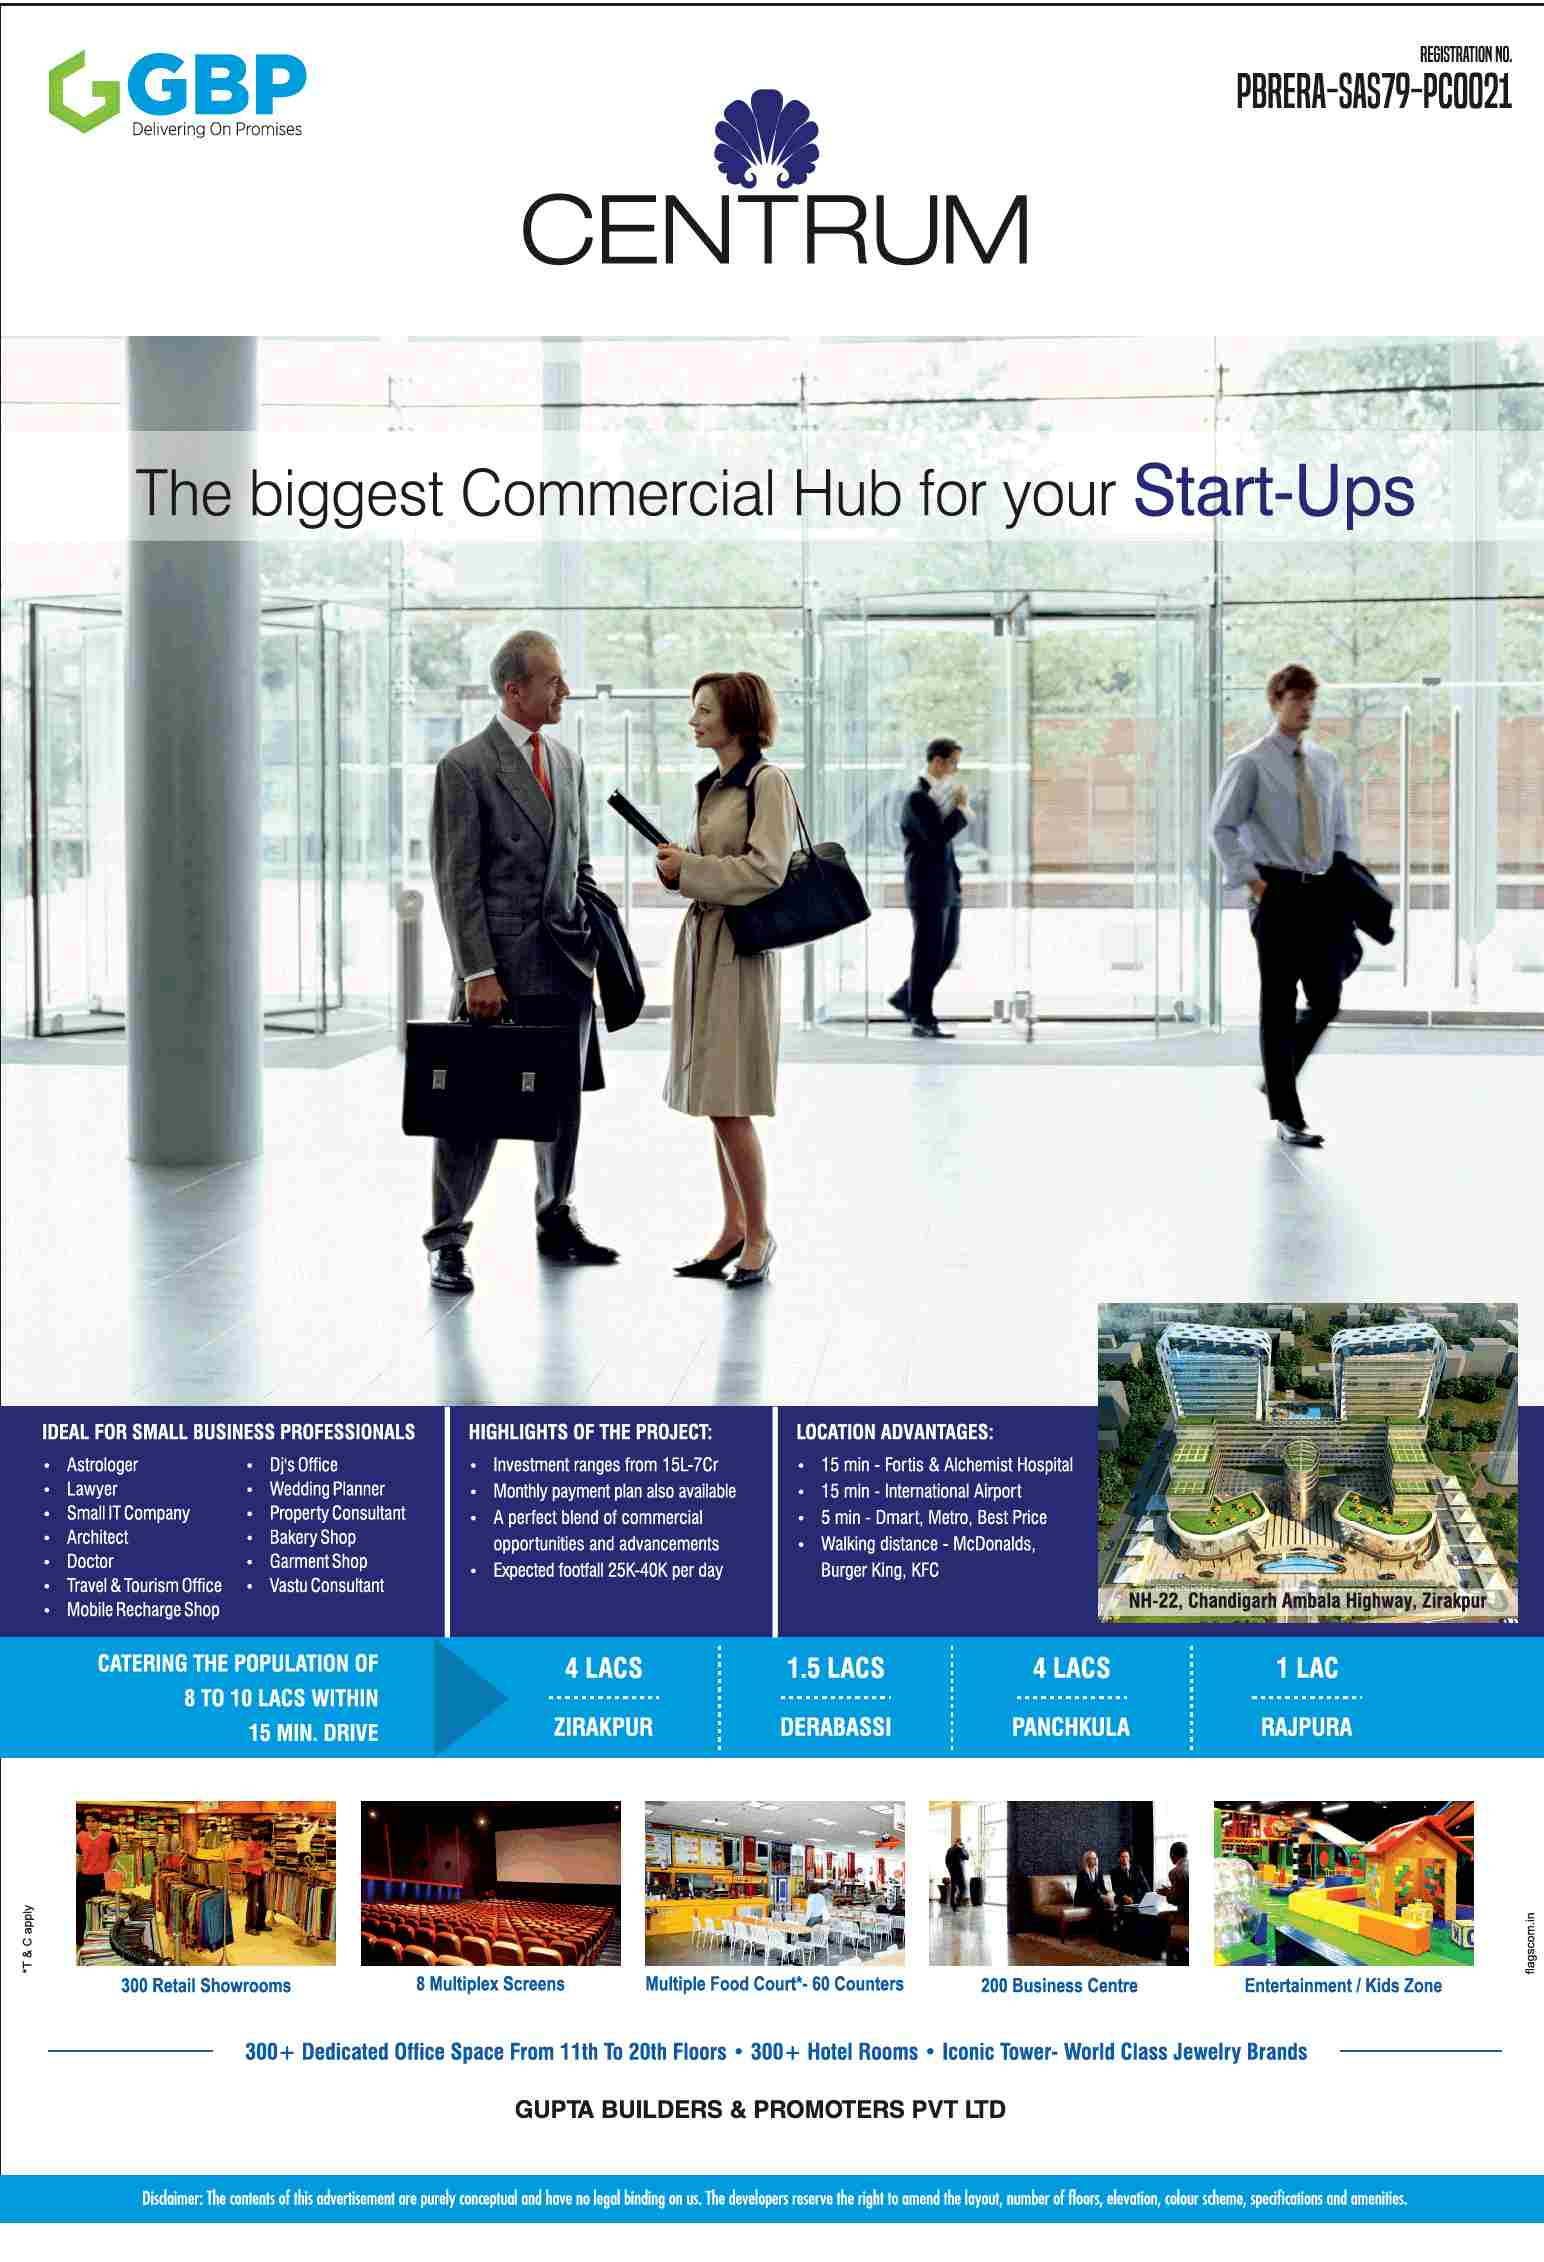 GBP Centrum - The biggest Commercial Hub for your Start-Ups in Chandigarh Update